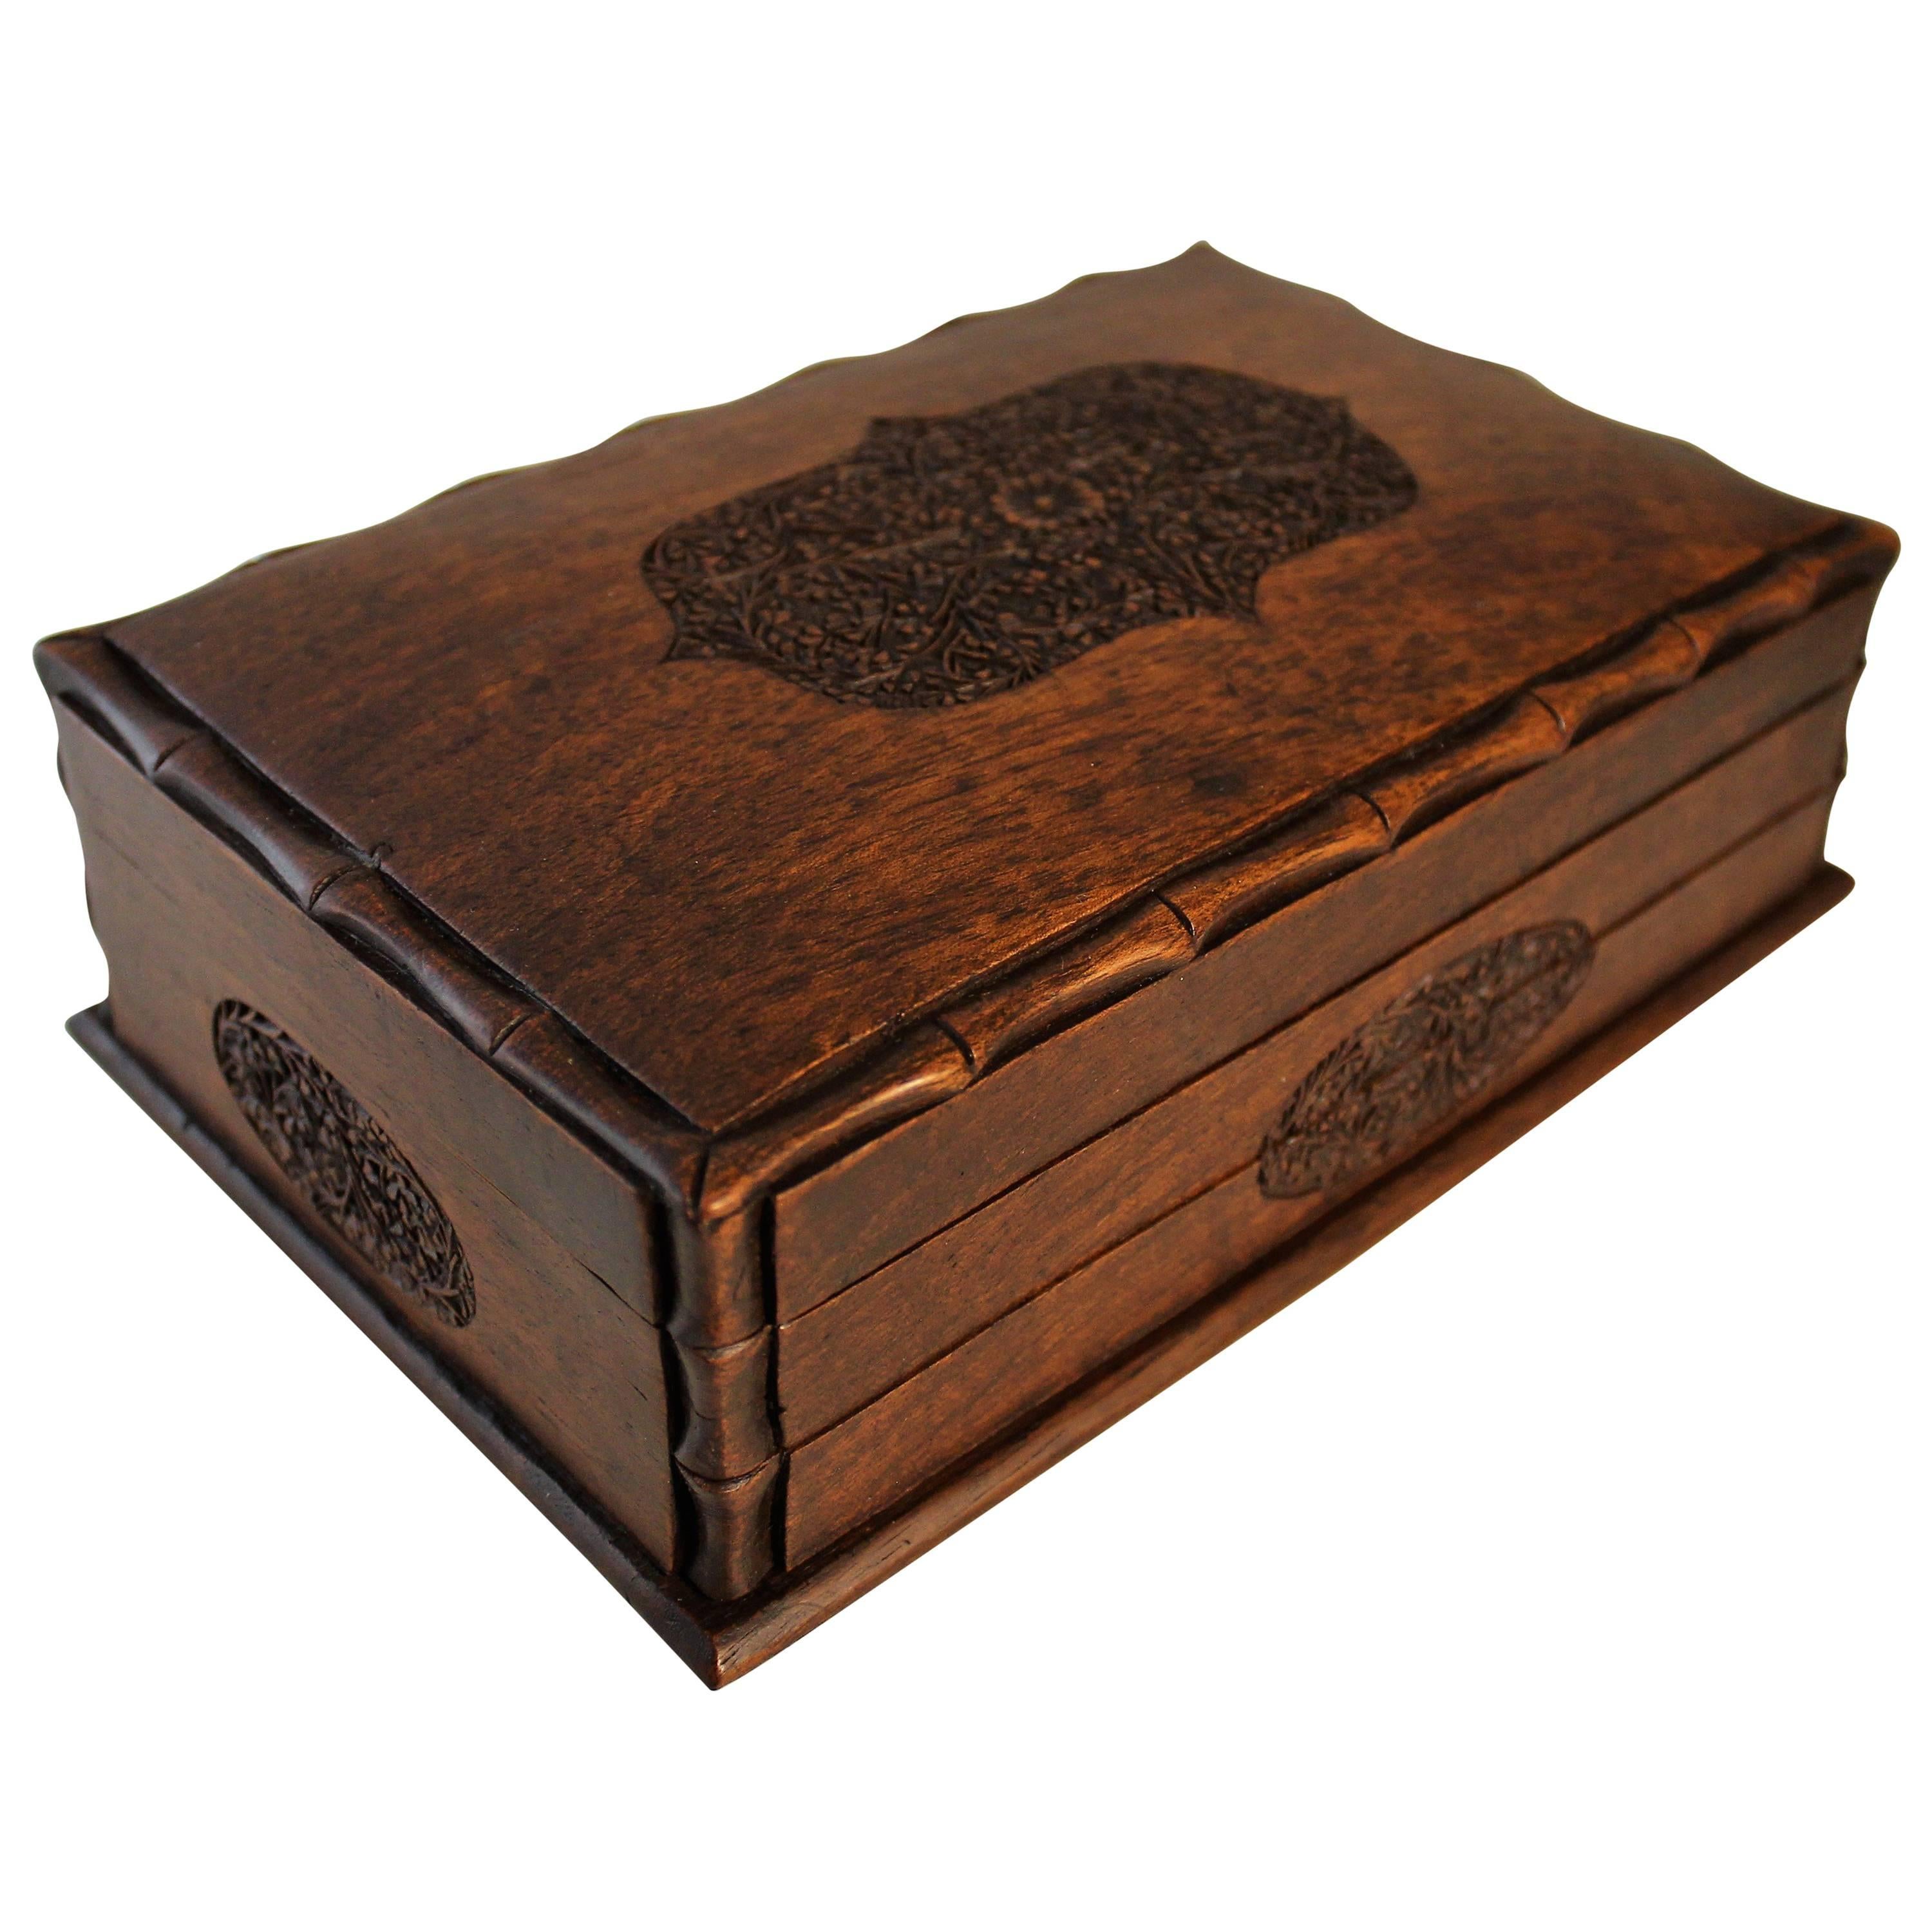 Edwardian Hand-Carved Puzzle Box with Trick Opening